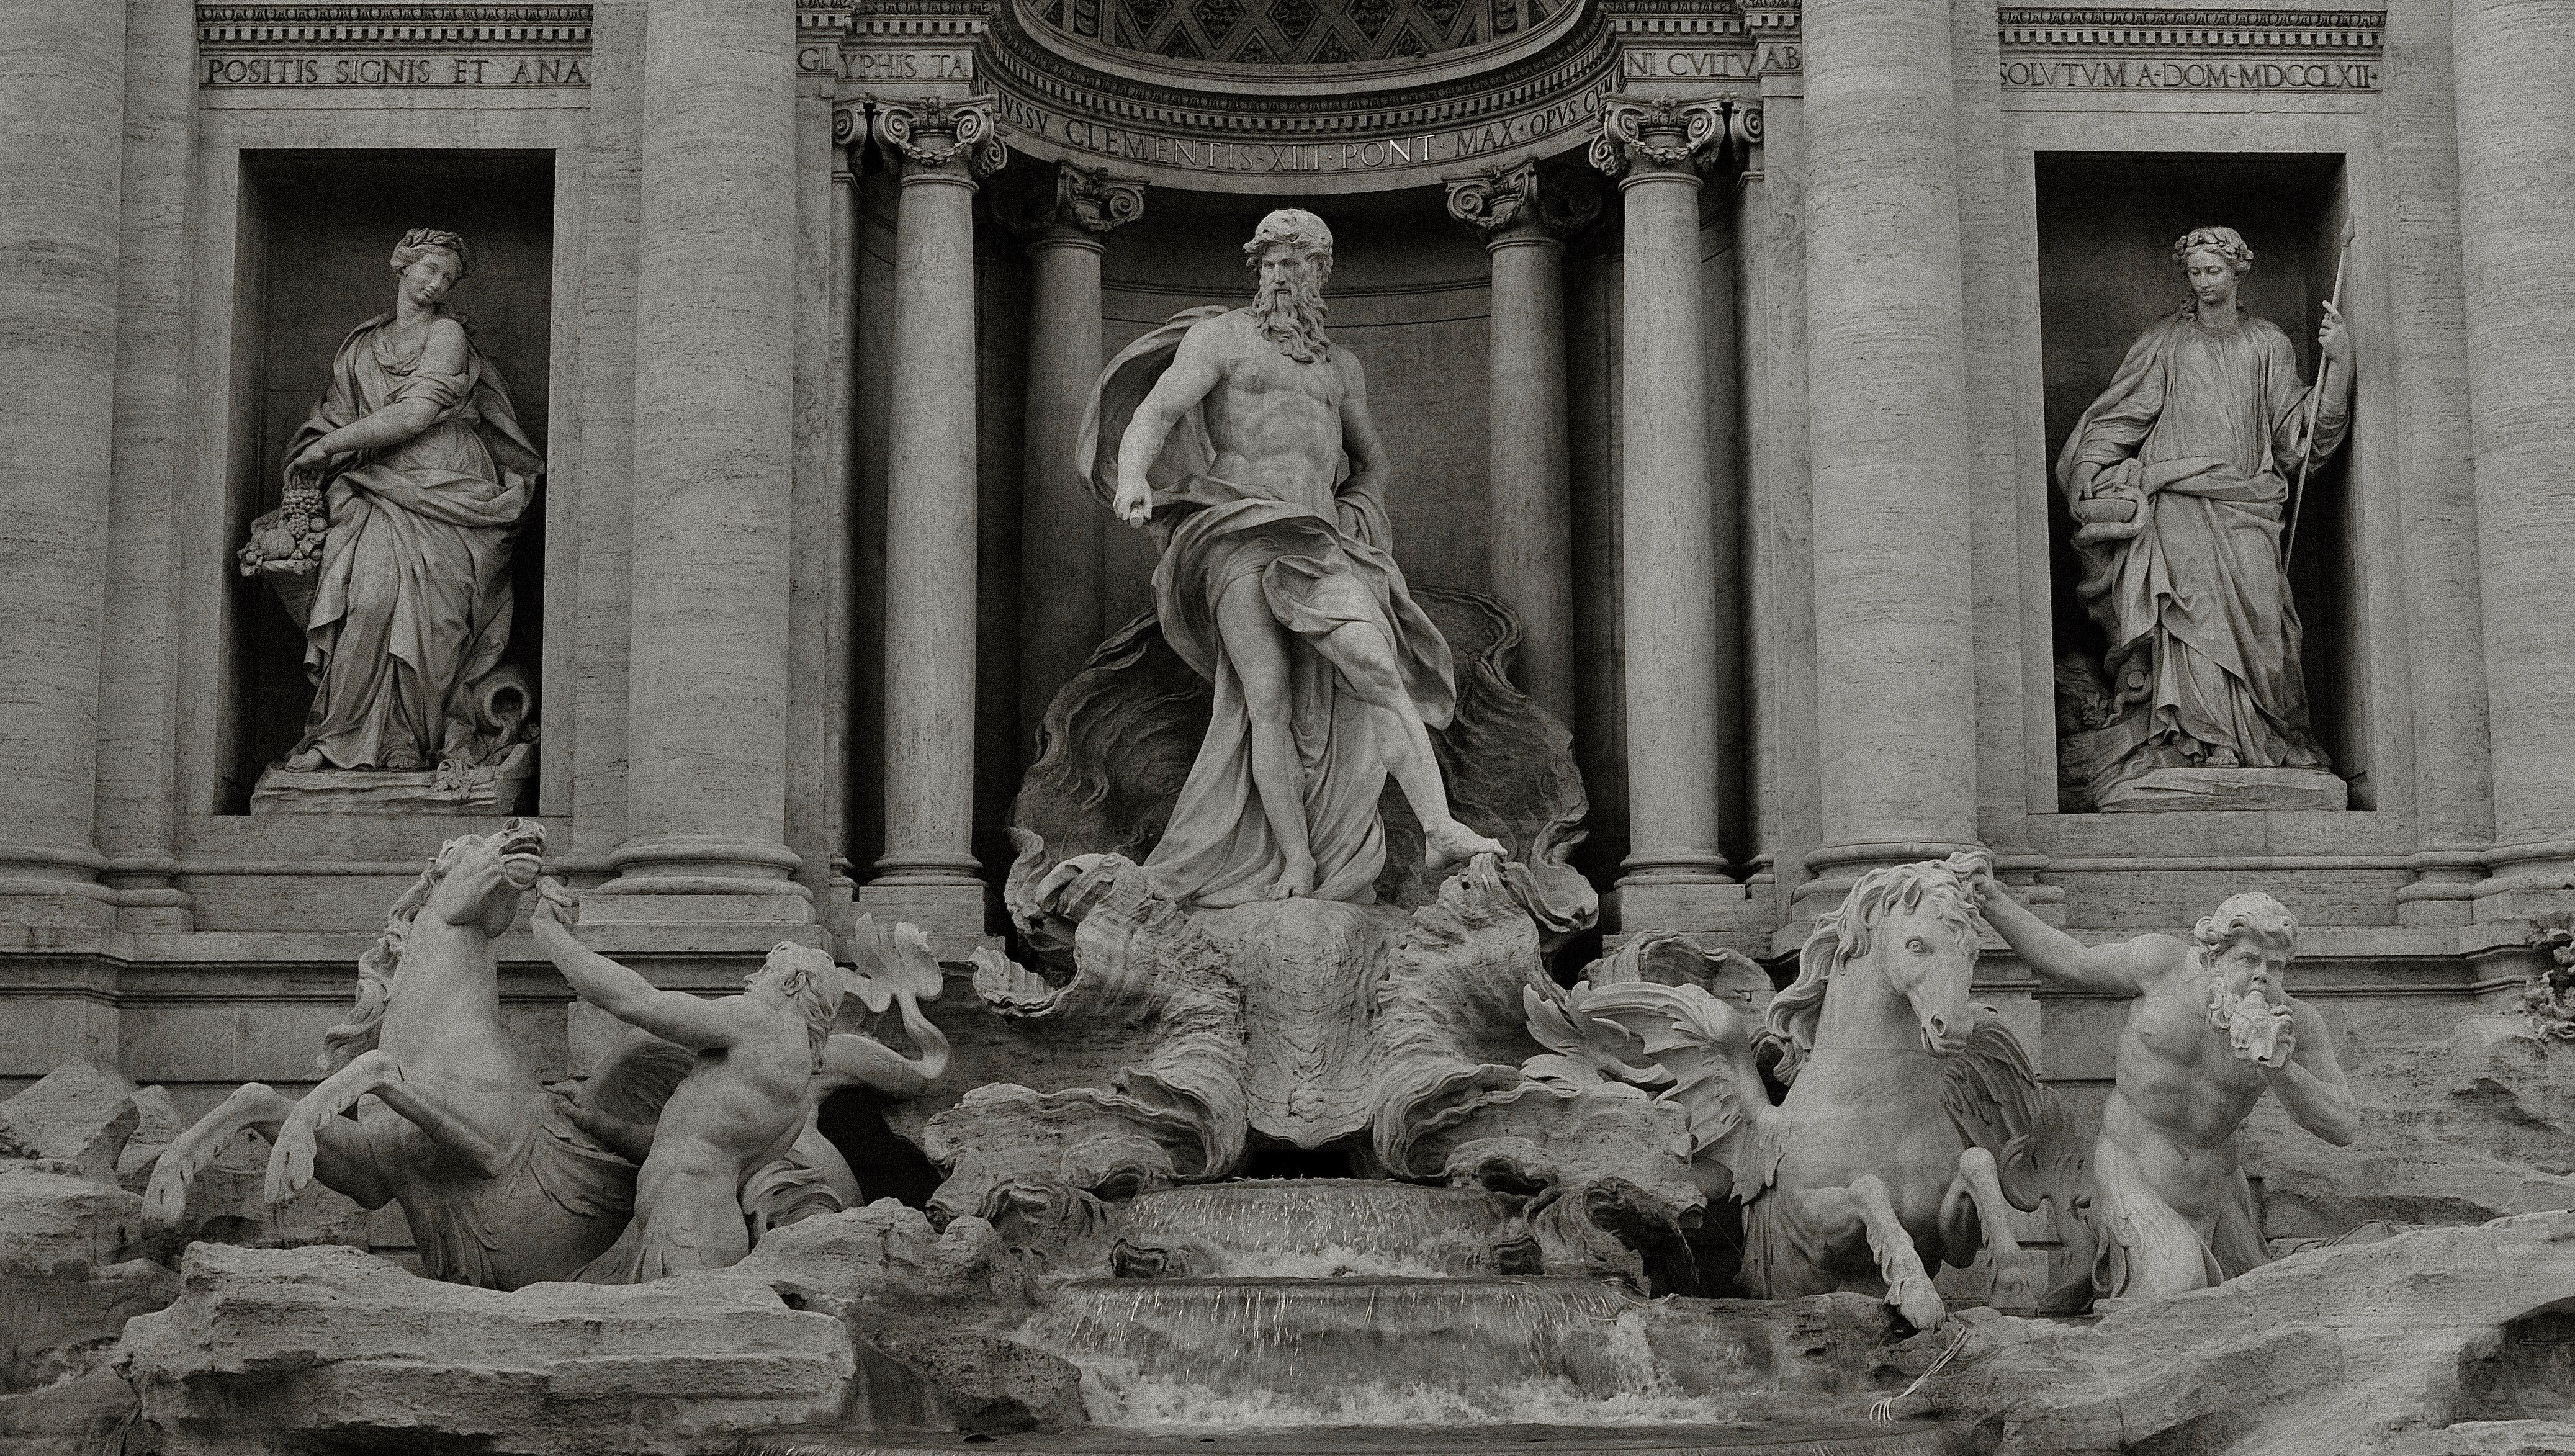 A beautiful statue in front of the Trevi fountain in Rome, Italy. - Greek statue